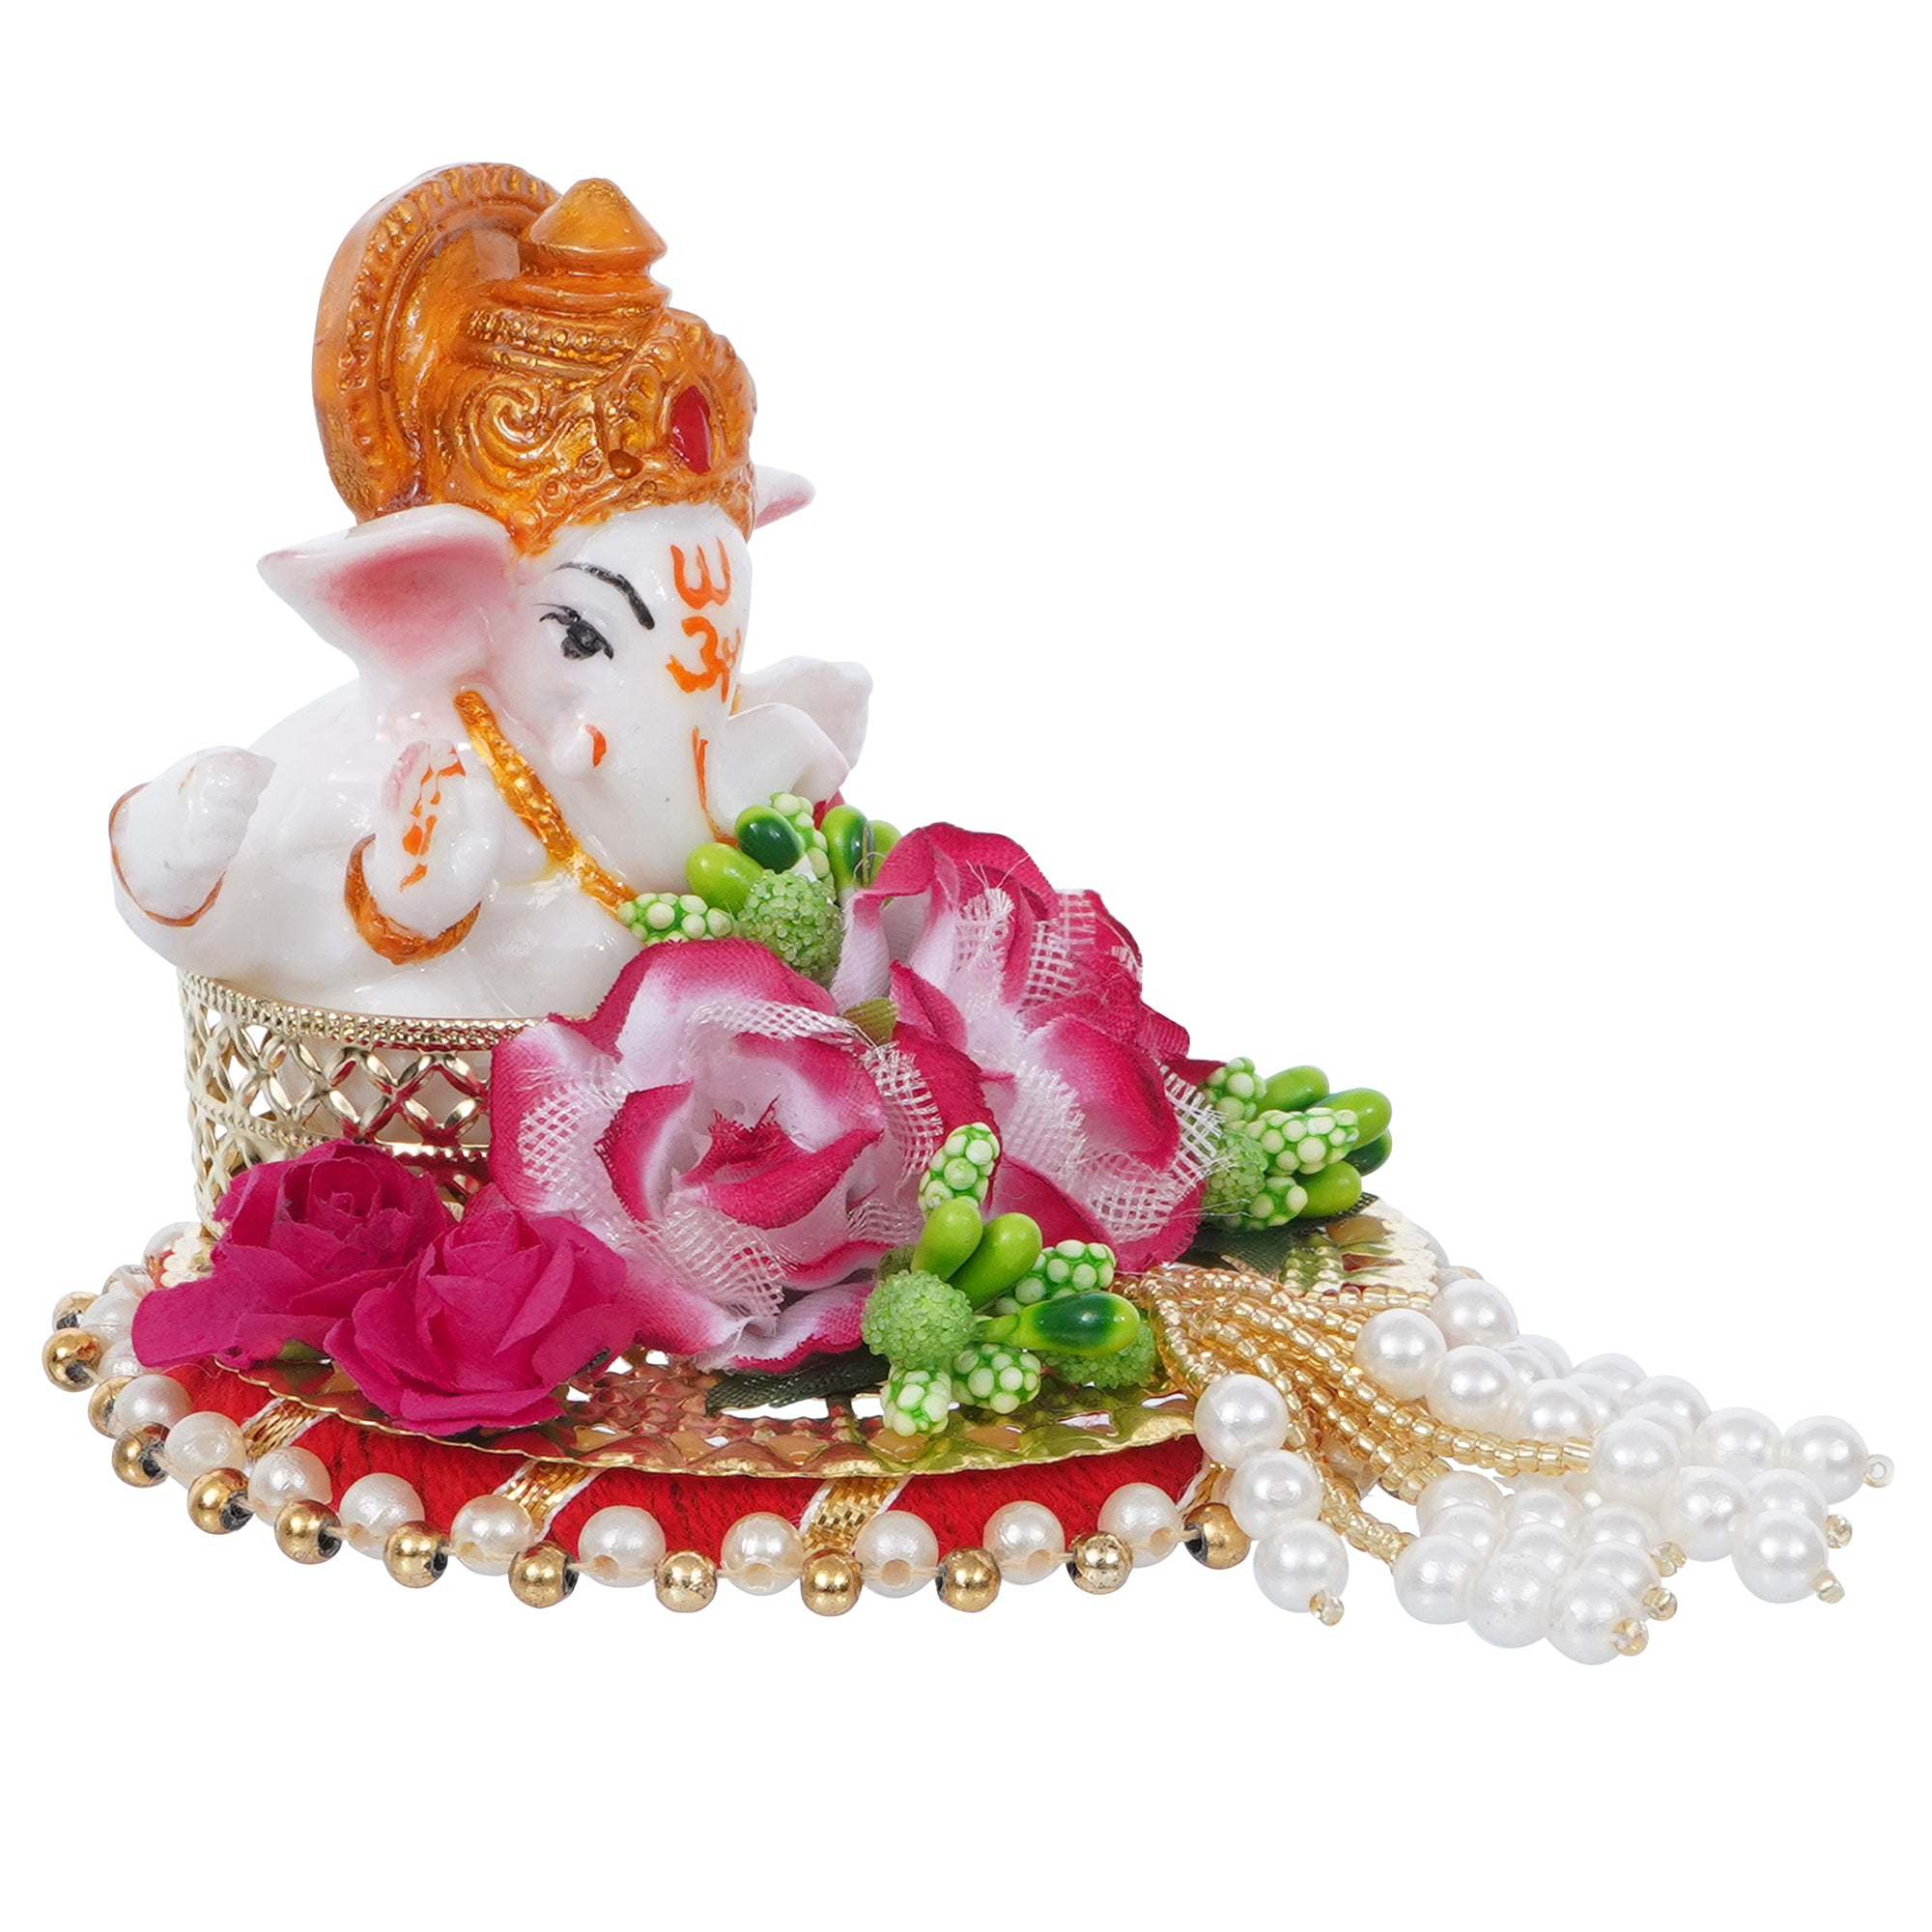 Lord Ganesha Idol On Decorative Handcrafted Colorful Flowers Plate 2